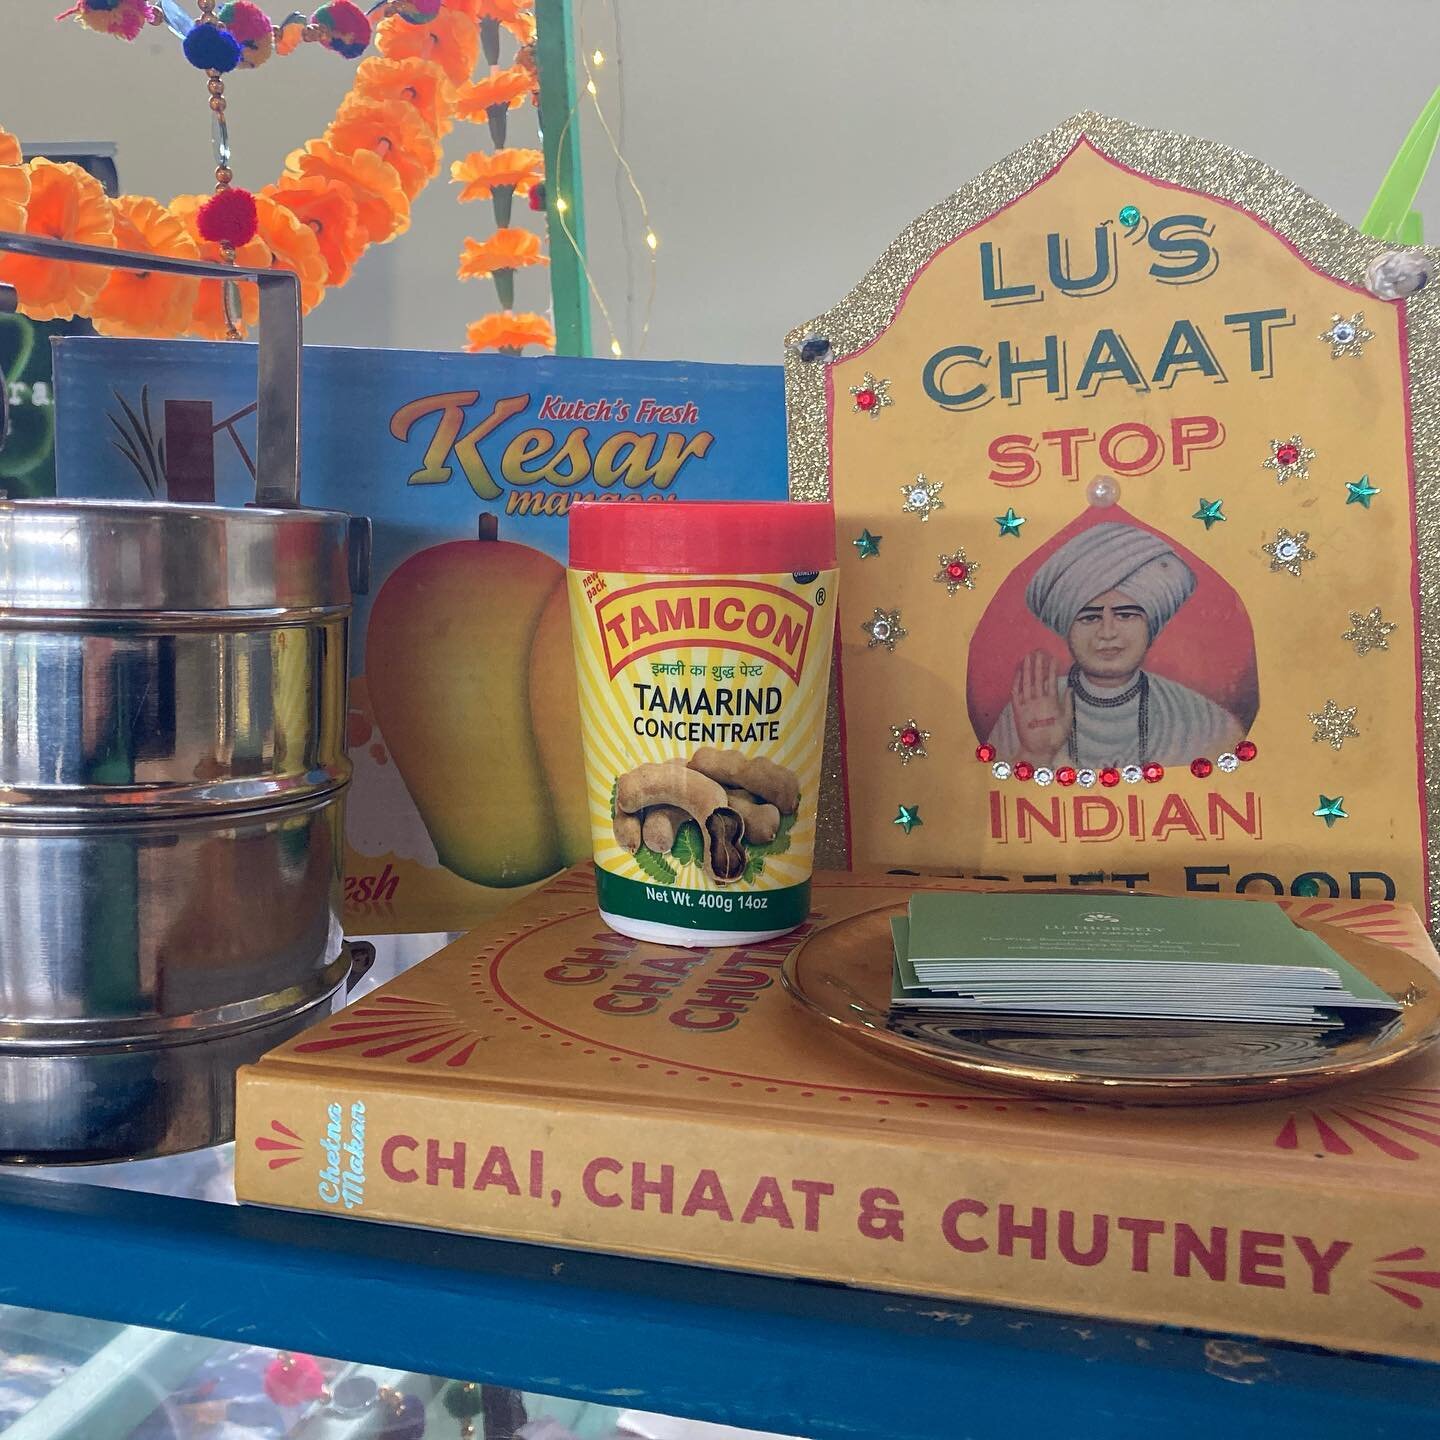 Snack attack in Slane at LU&rsquo;S CHAAT stall
@rockfarmslane @glasgow_diaz .
Thursday 11-4 
More spicy 🌶 delights as well as soothing , heart warming ginger &amp; turmeric broth served with sticky rice .  Guaranteed to make you GLOW ☀️😊☀️😊☀️
See